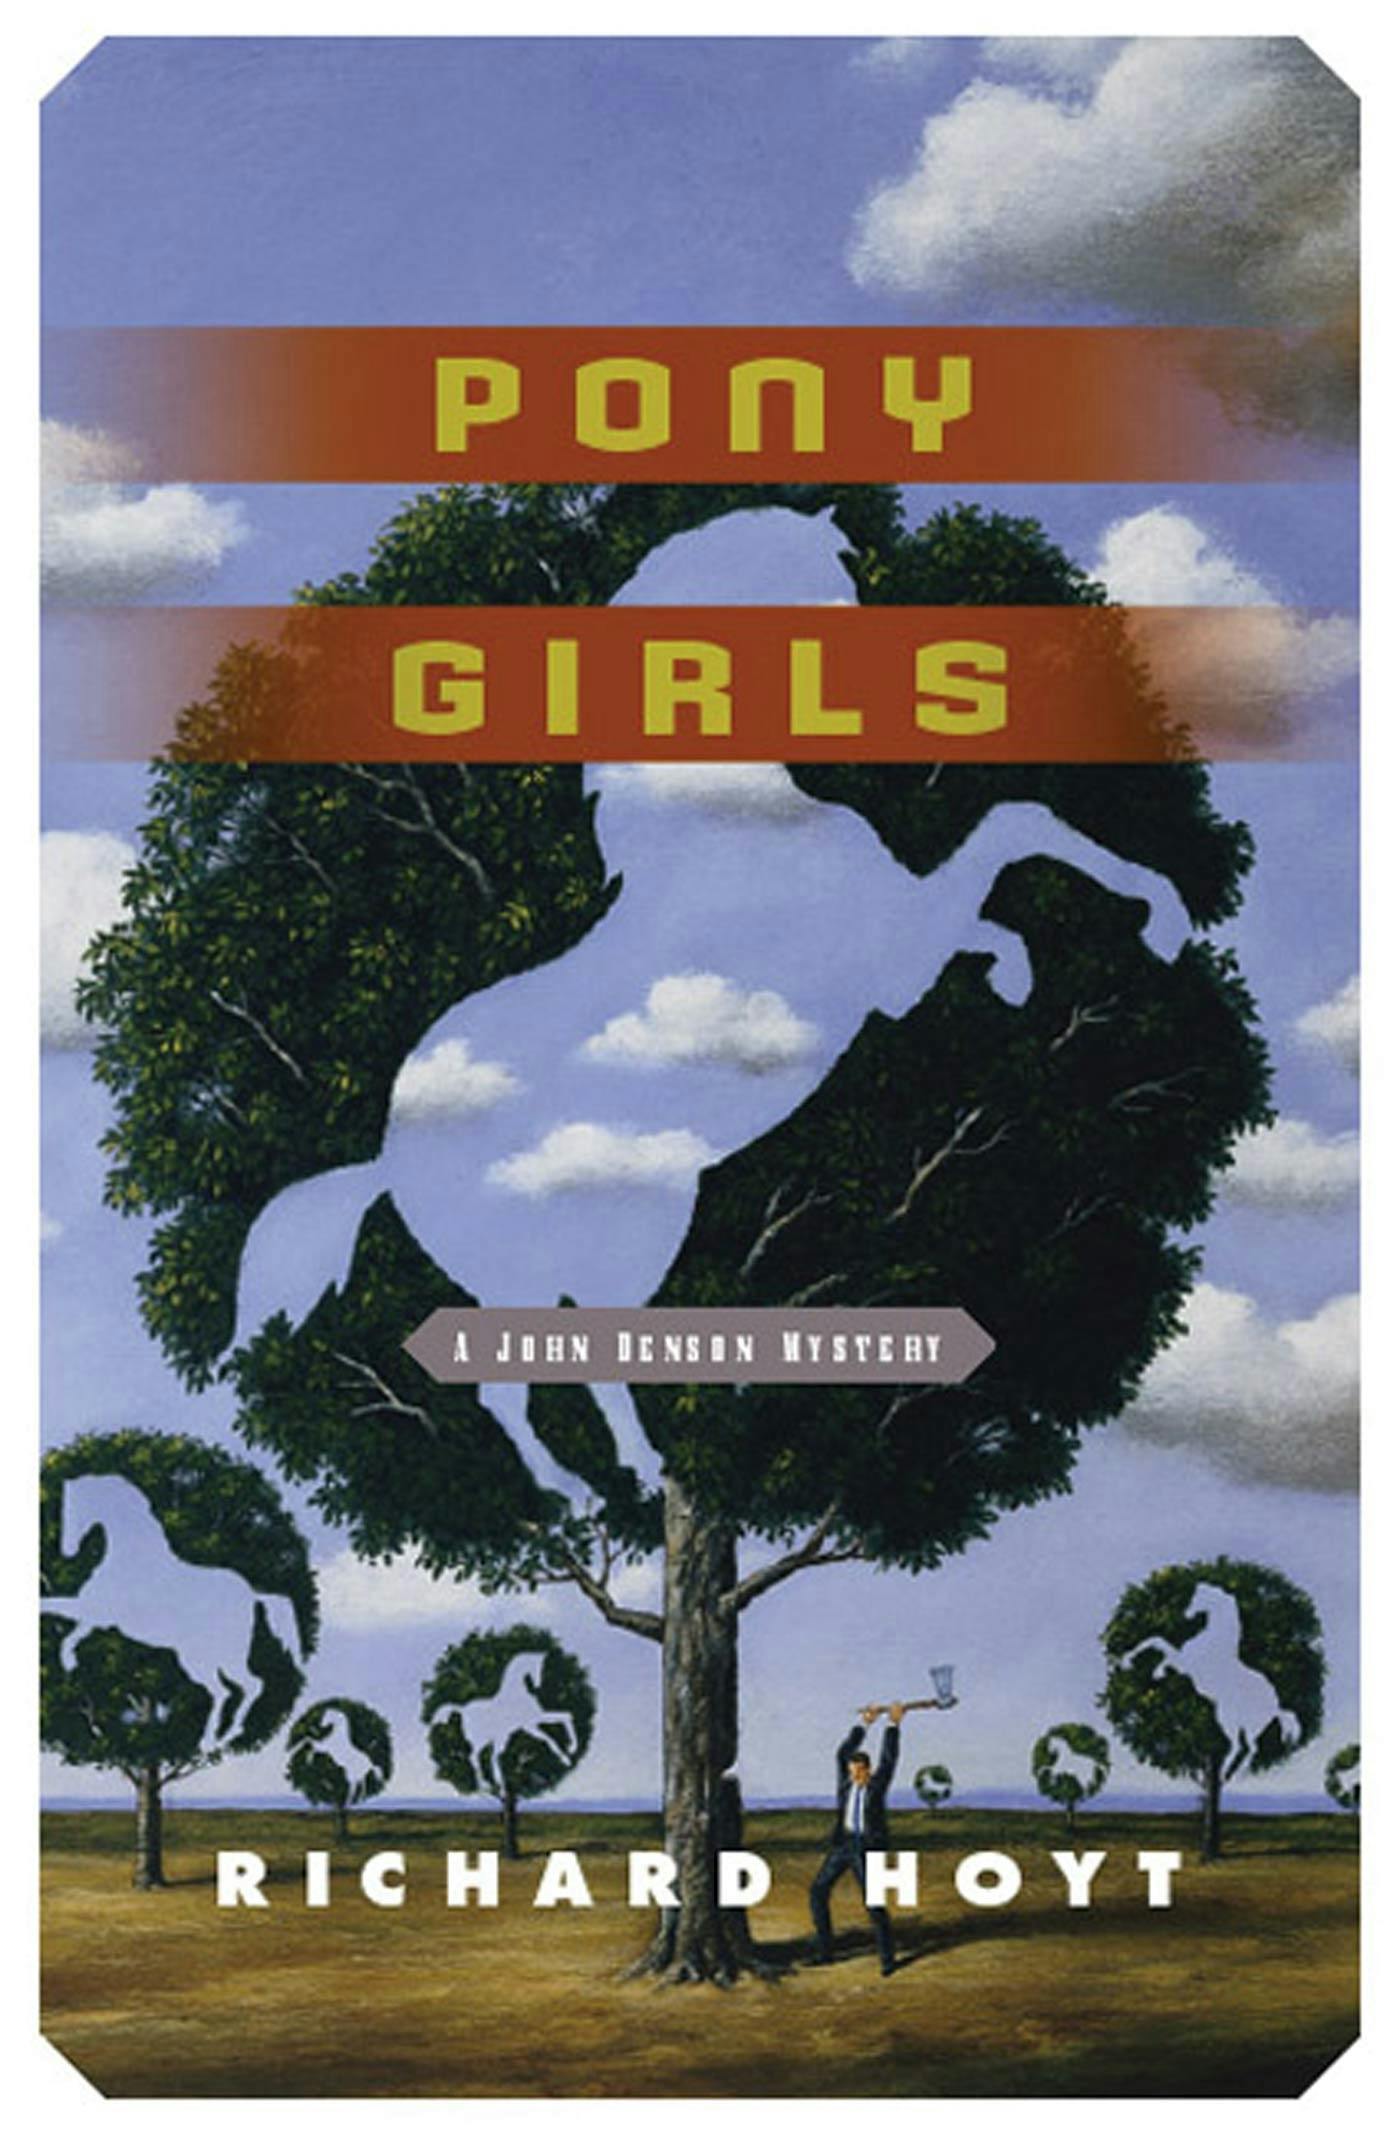 Cover for the book titled as: Pony Girls